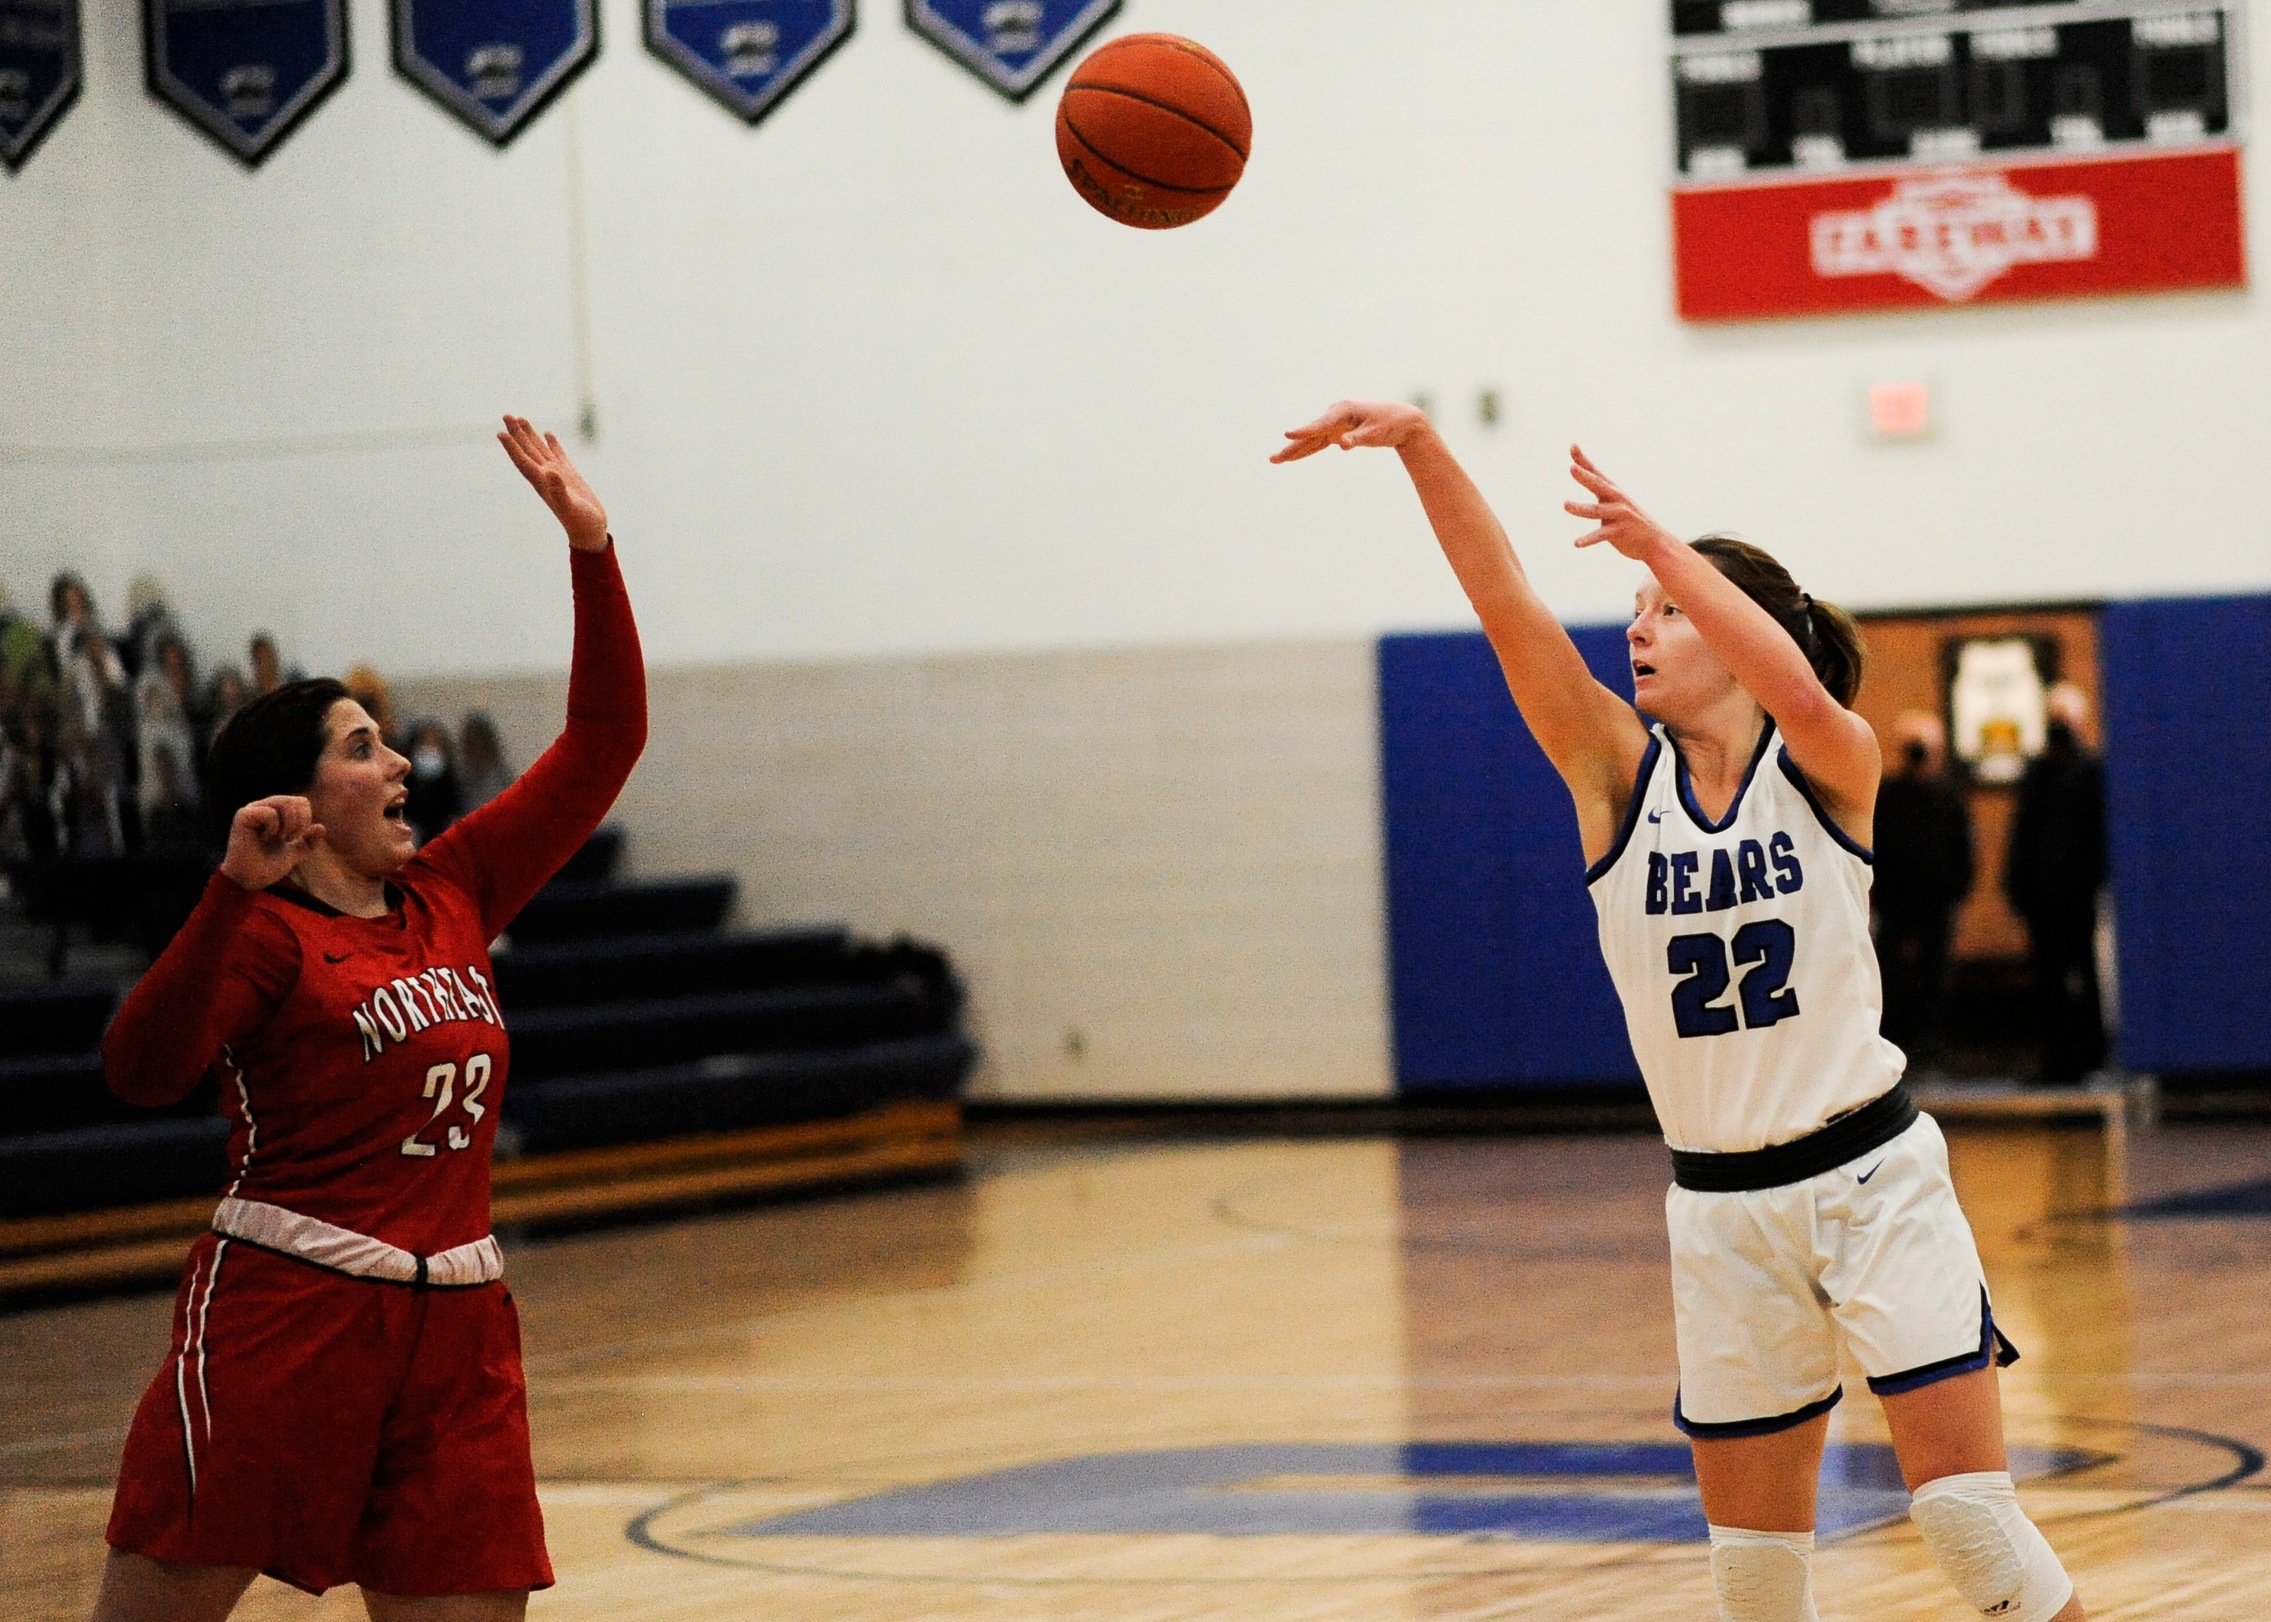 Flanagan's 20 points lead DMACC women's basketball team past SWCC, 77-68